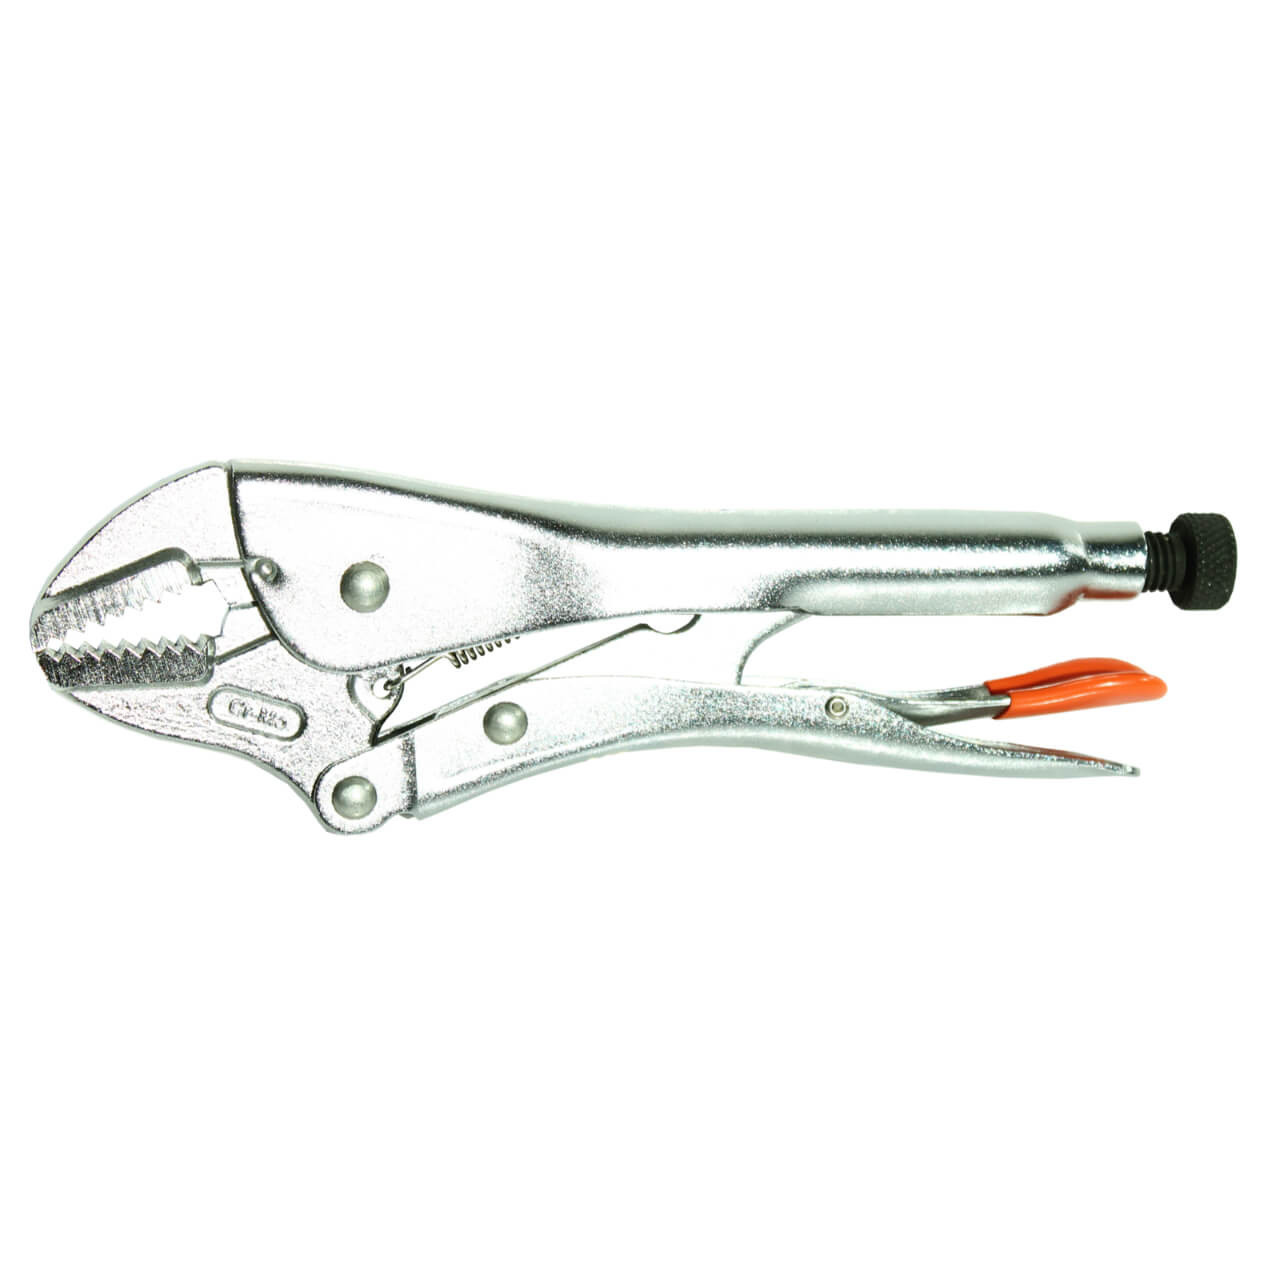 SP Tools 175mm Curved Jaw Locking Pliers